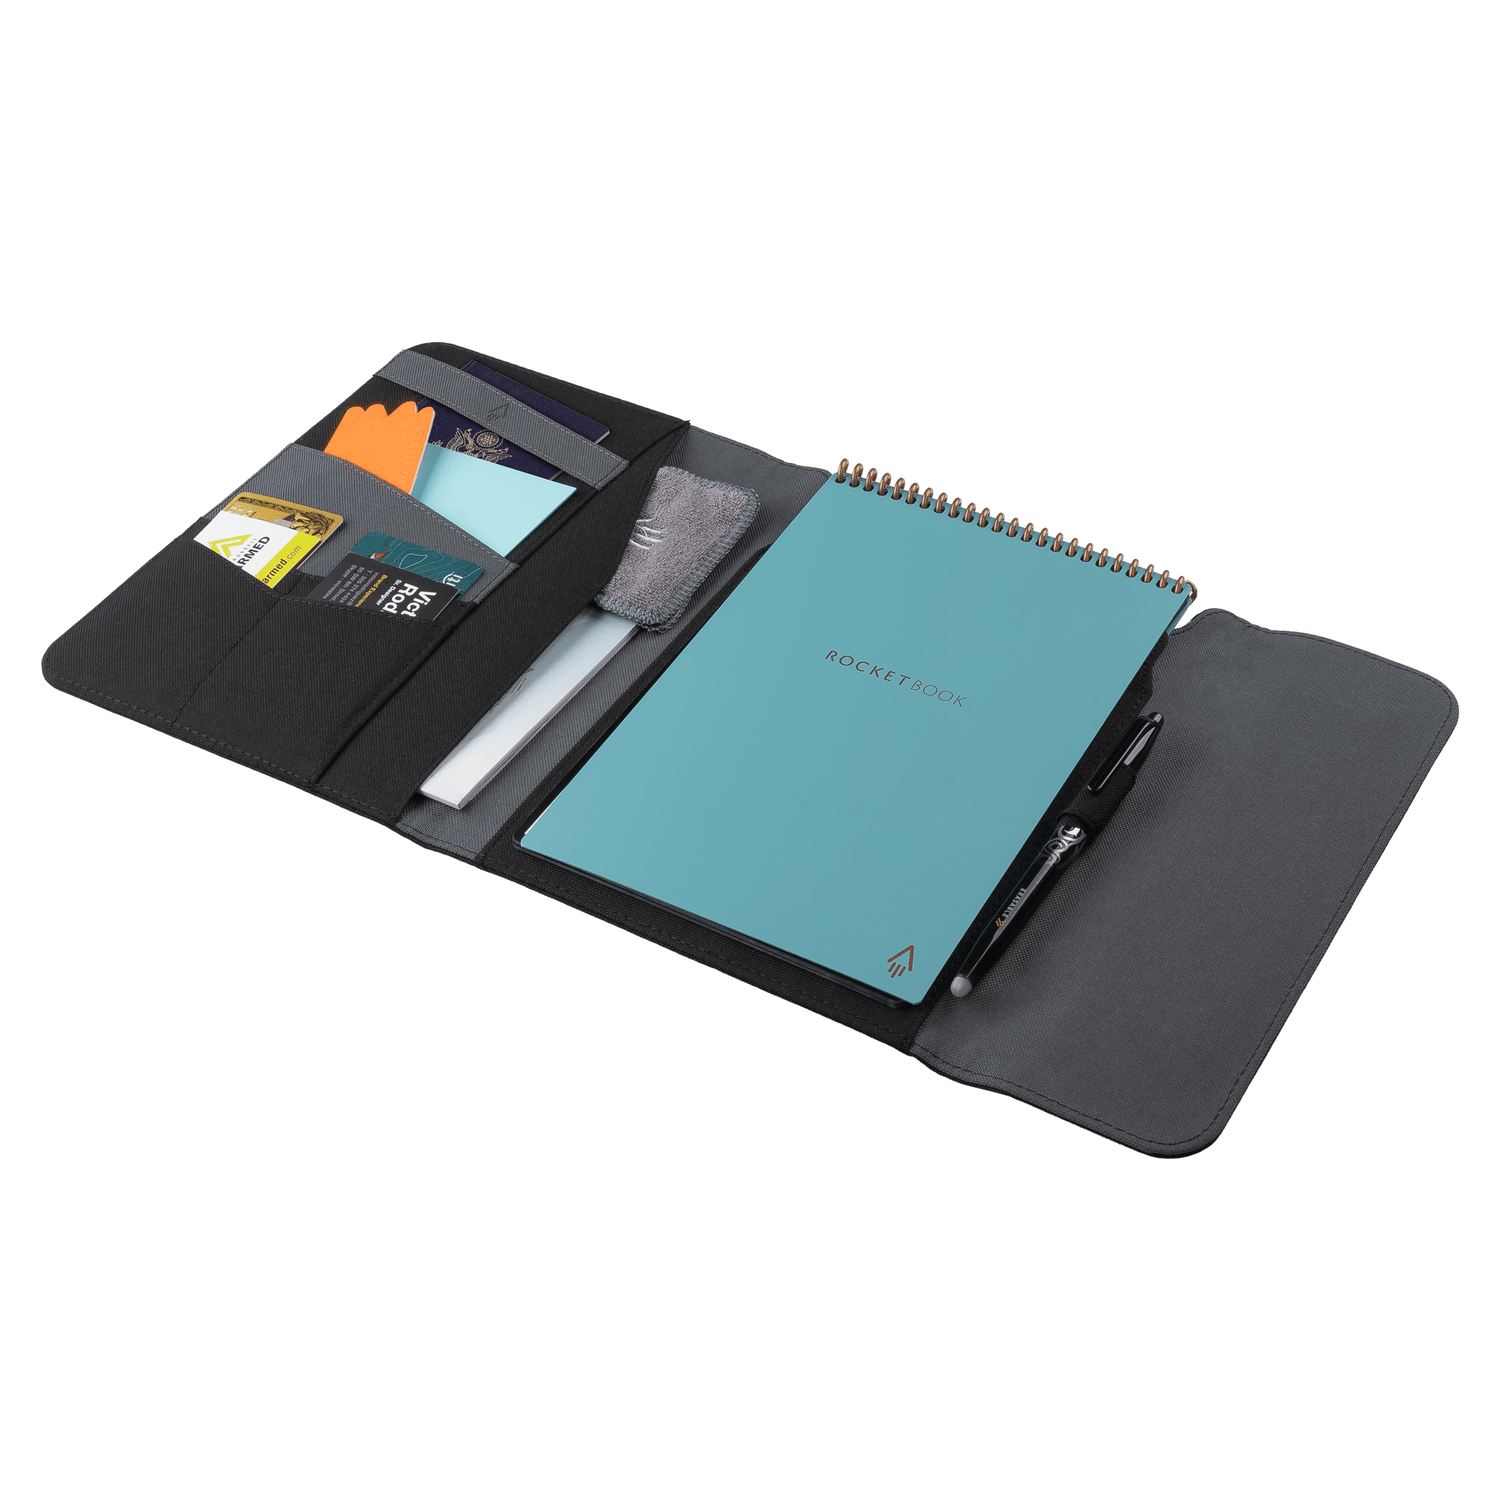 Rocketbook Capsule 2.0 vs. Rocketbook Folio Cover - Which Cover Is Better?